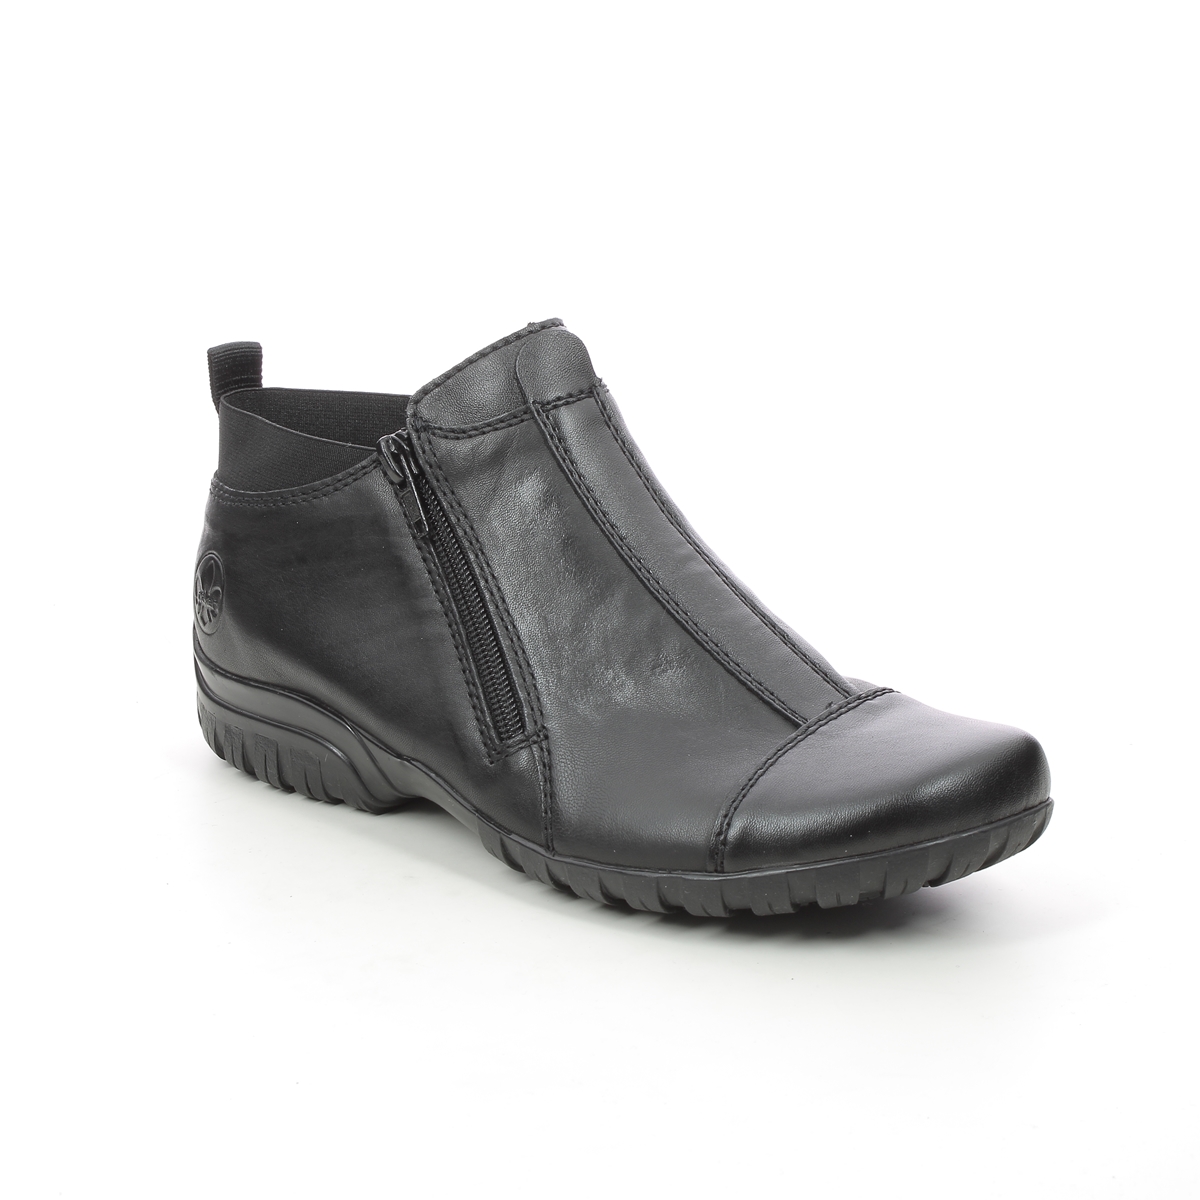 Rieker Birbocap 15 Black Leather Womens Ankle Boots L4653-00 In Size 39 In Plain Black Leather